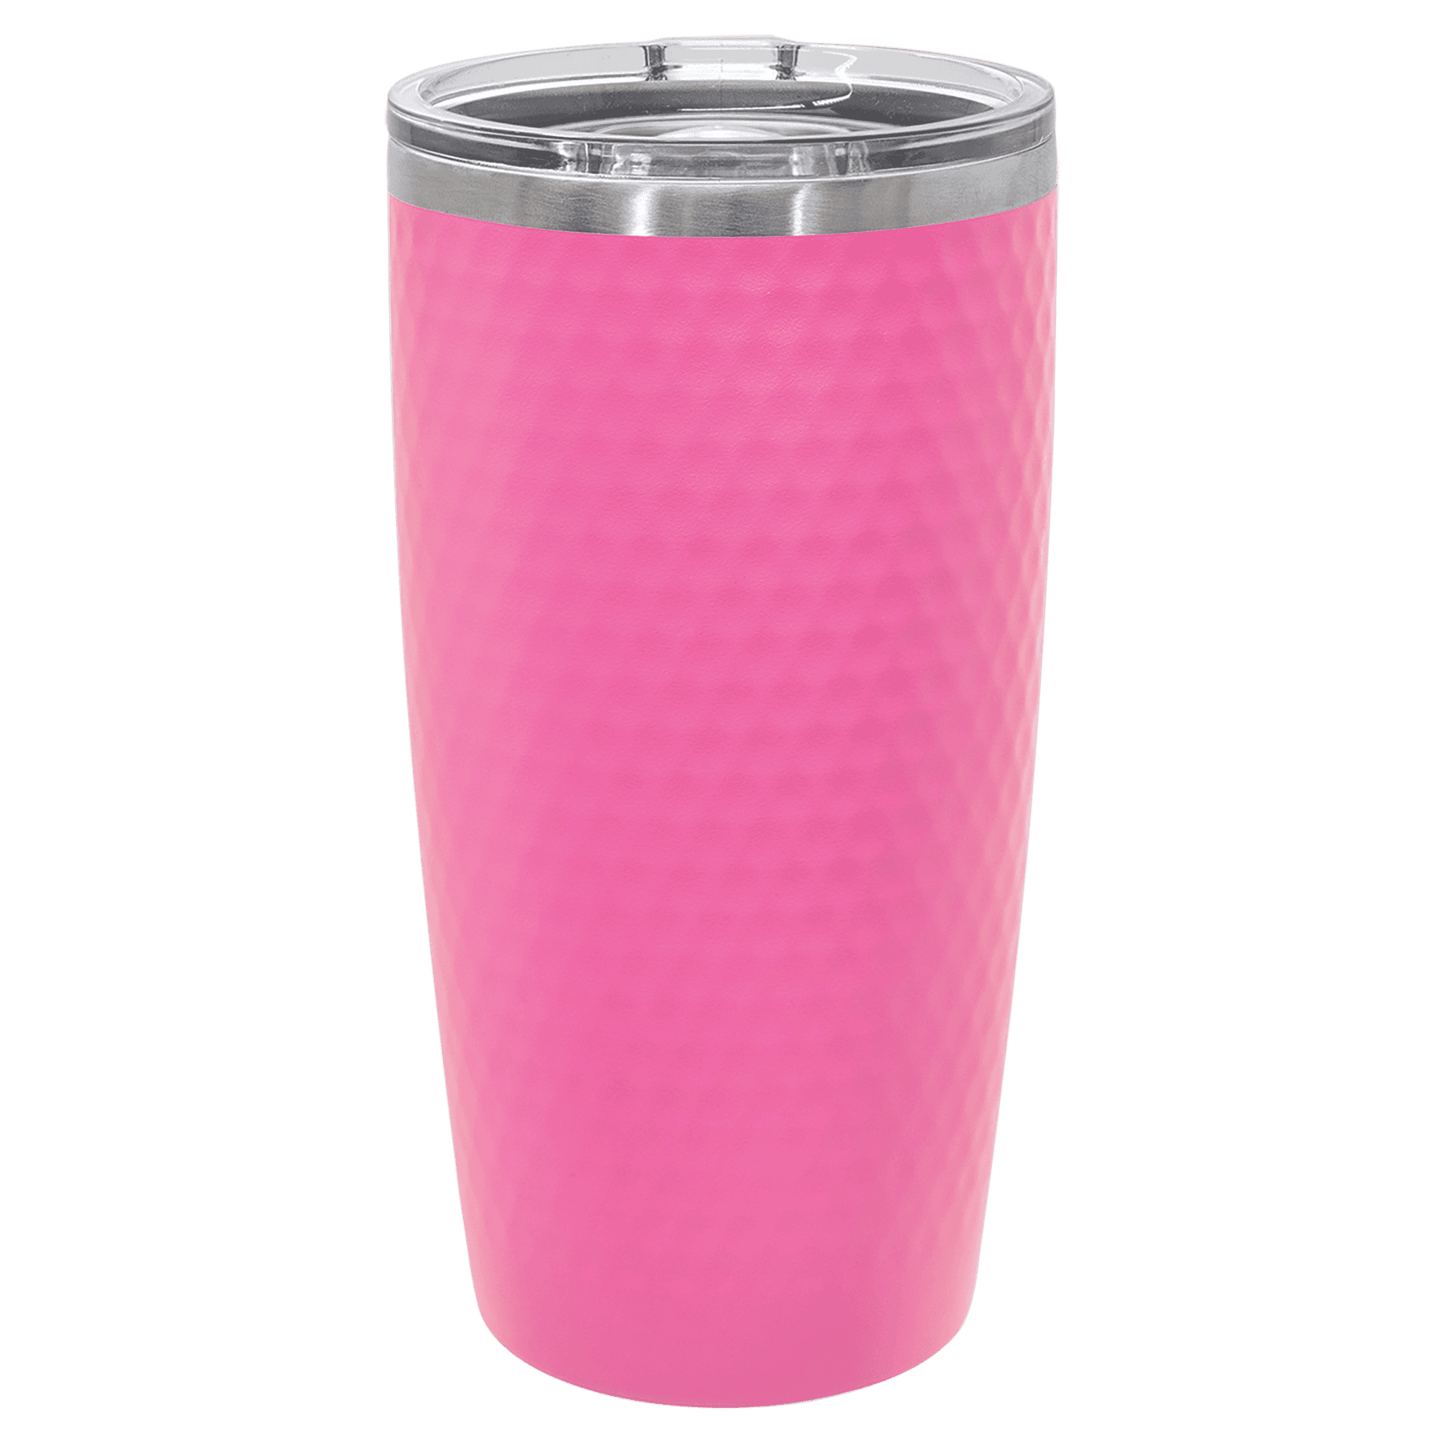 Polar Camel 20 oz. Golf Tumbler with Dimples and Slider Lid